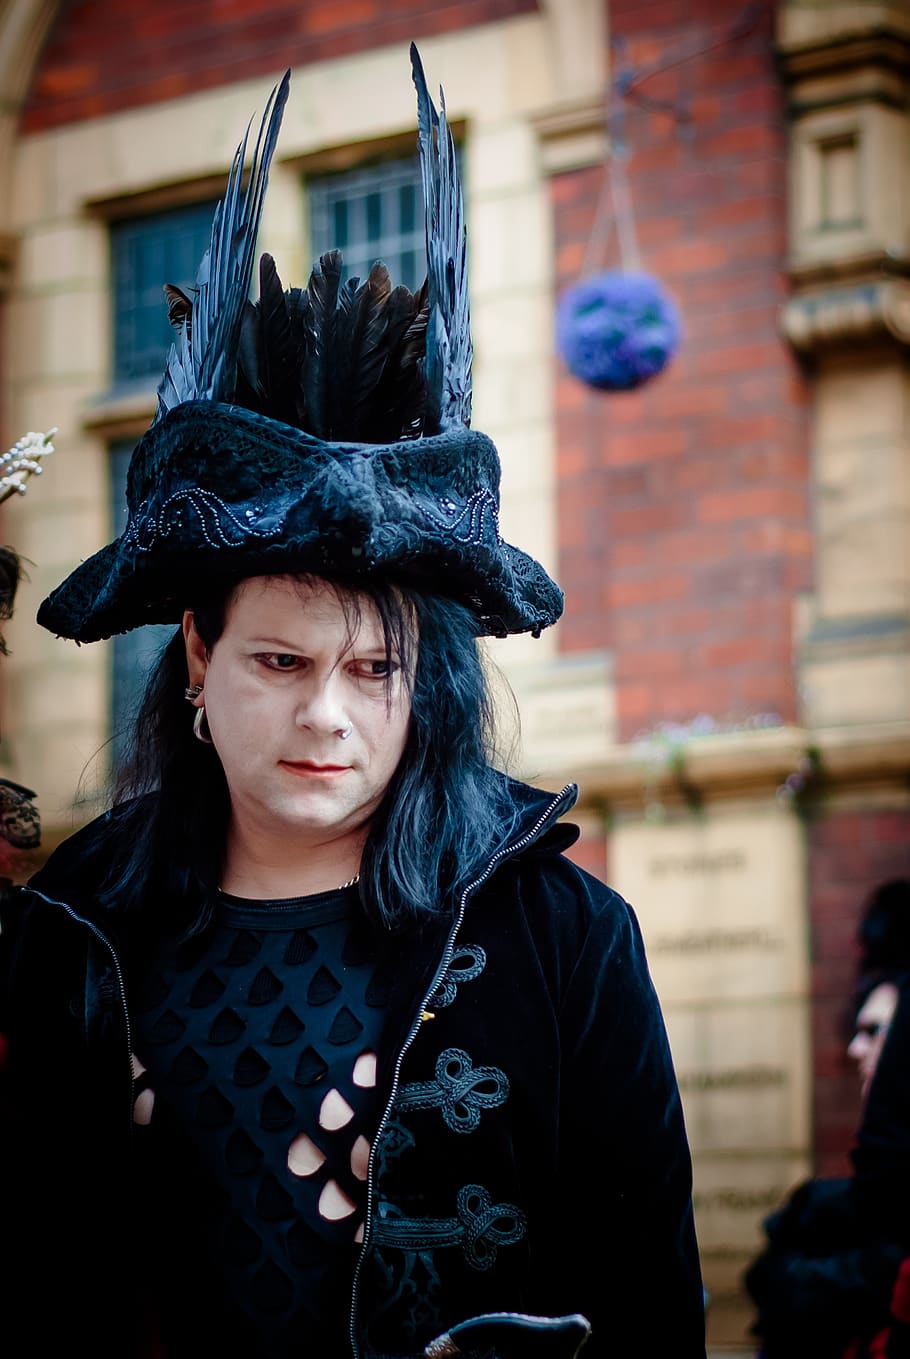 whitby goth weekend, festival, gothic, man, one person, clothing, front view, focus on foreground, architecture, real people